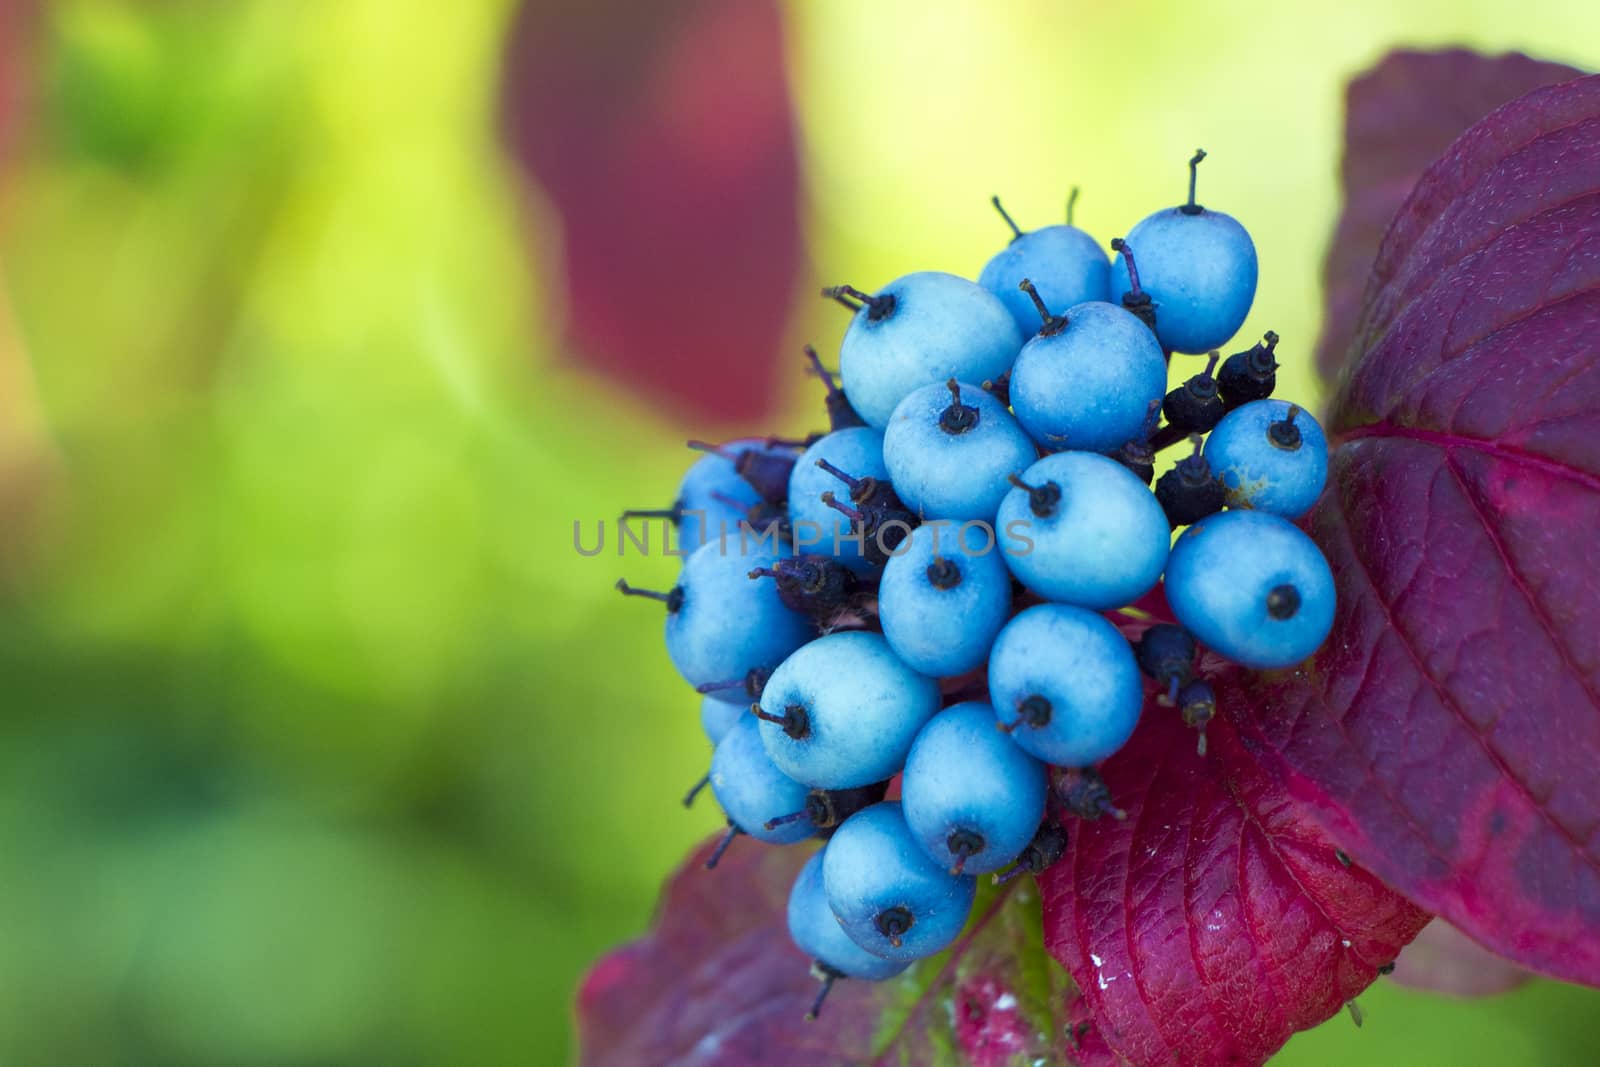 Small Blue Berries by Mads_Hjorth_Jakobsen